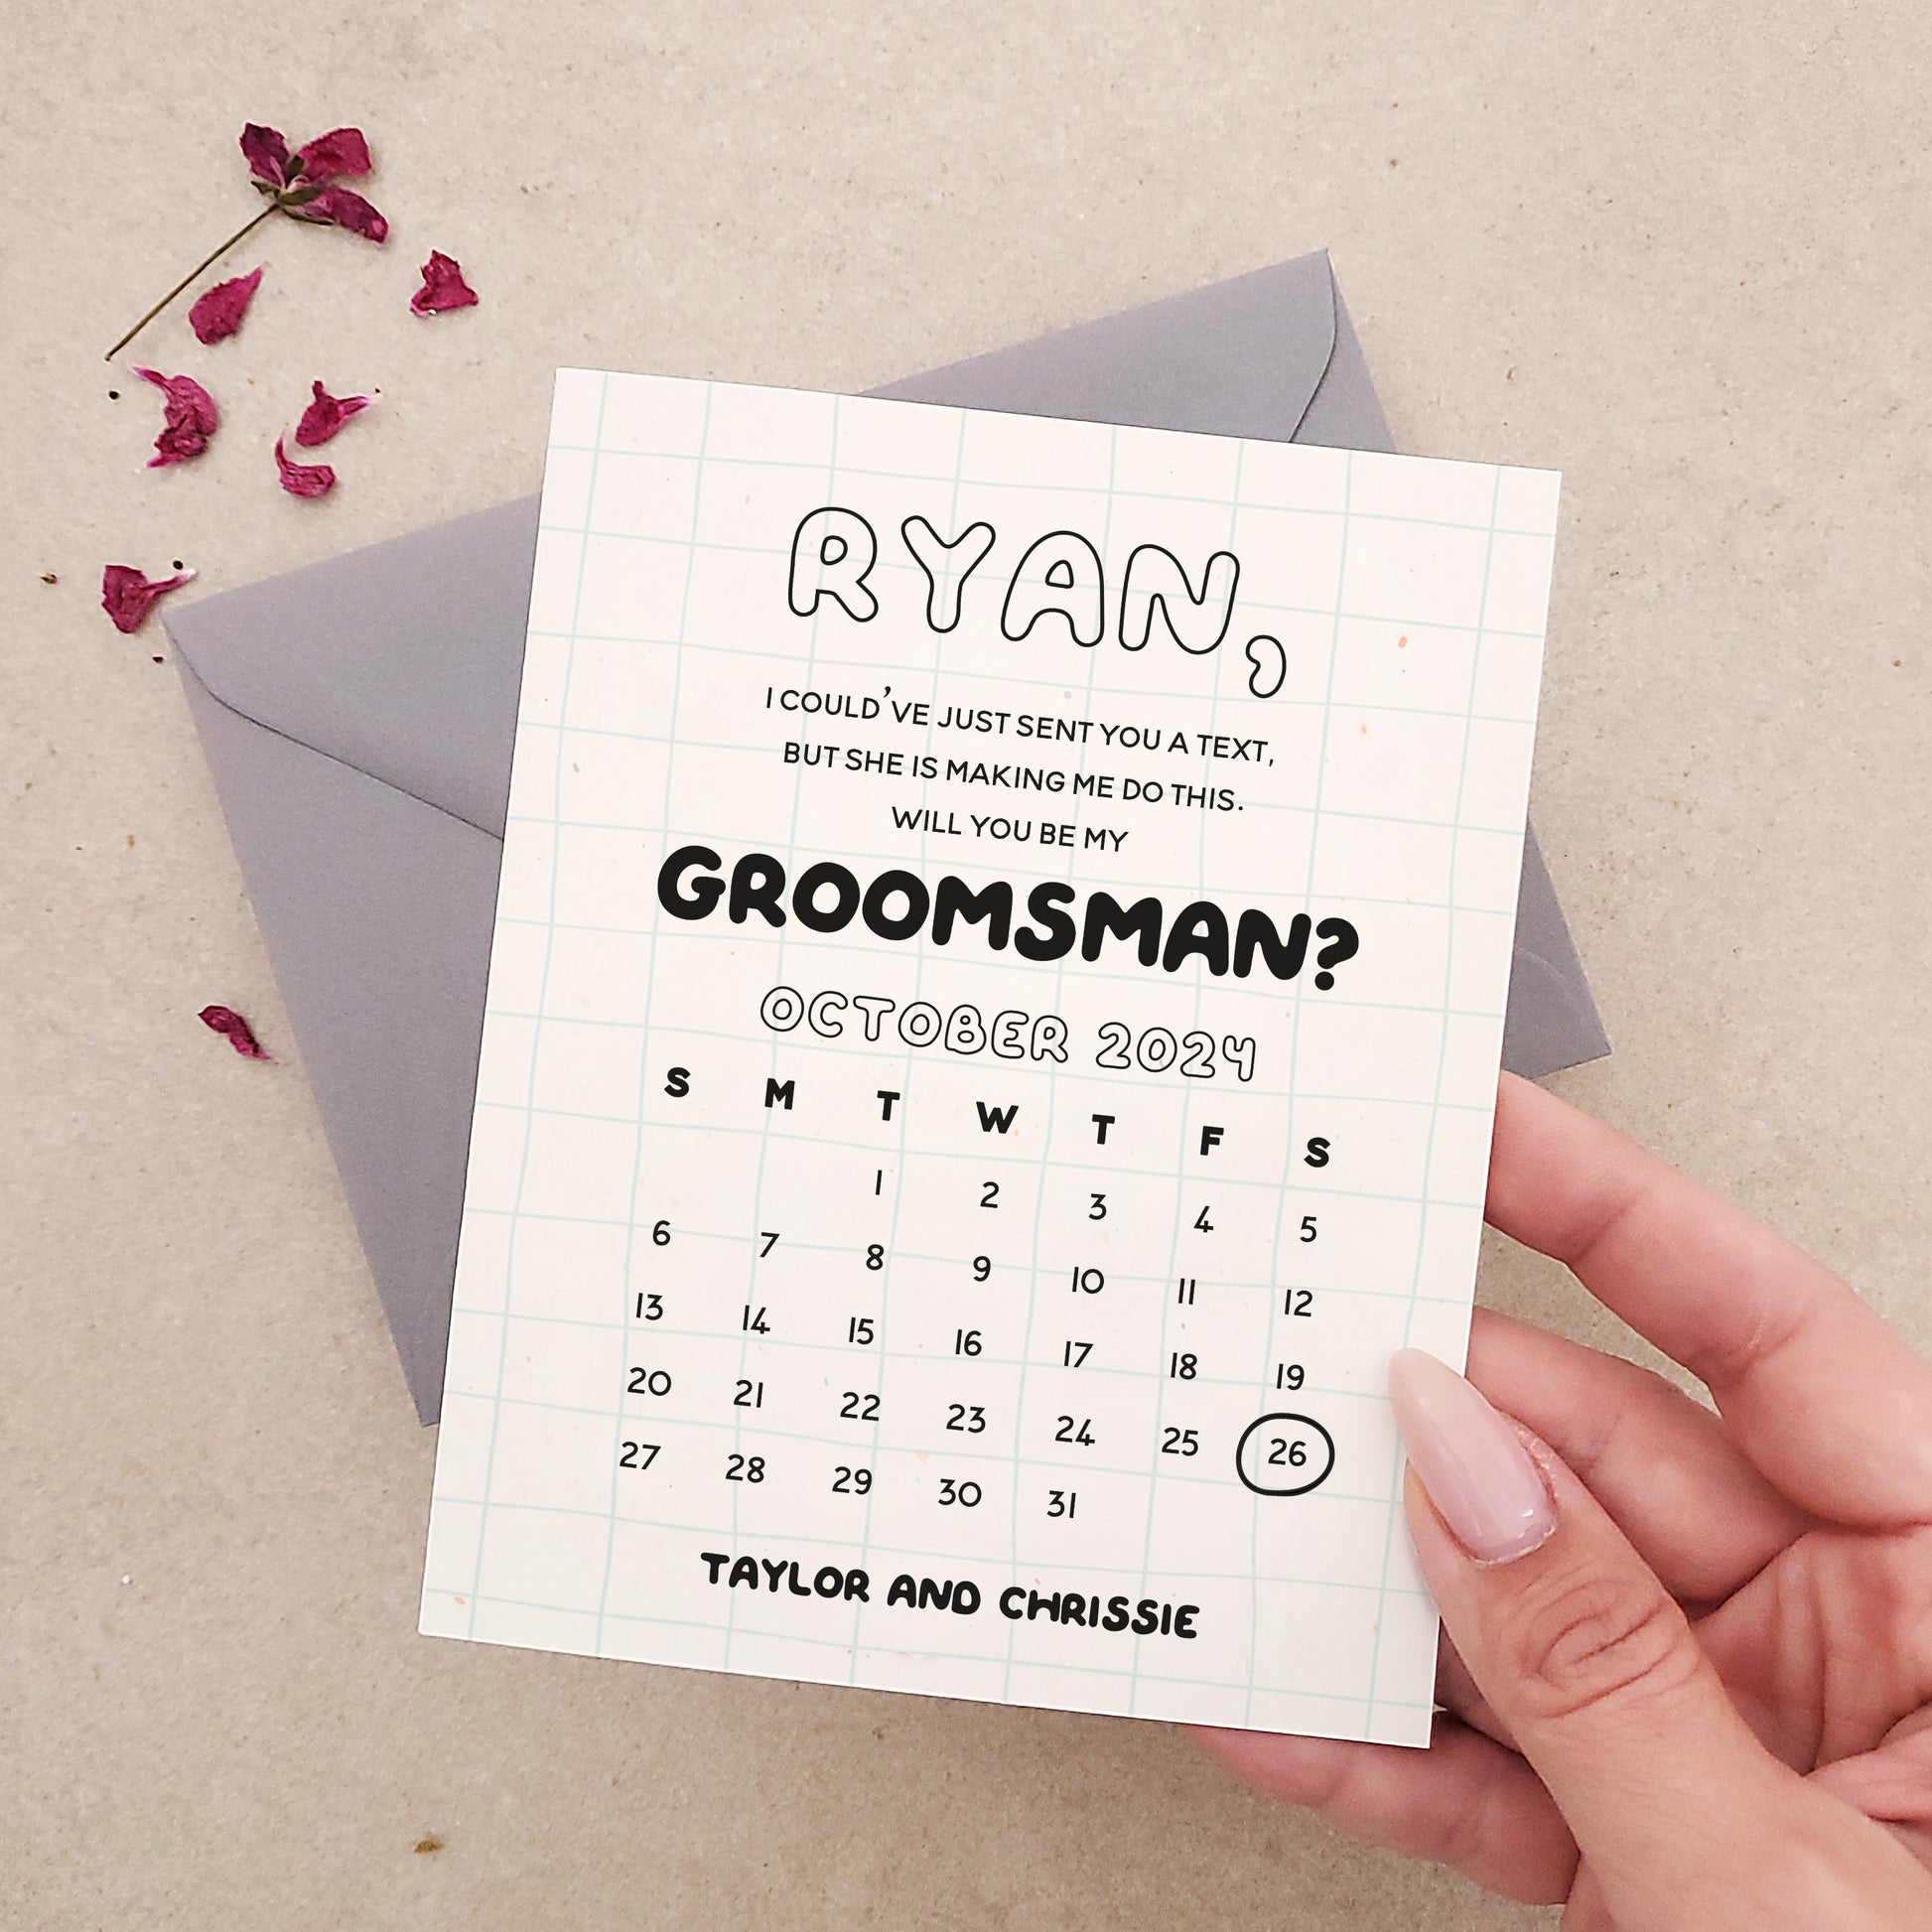 will you be my groomsman proposal card with funny save the date design - XOXOKristen